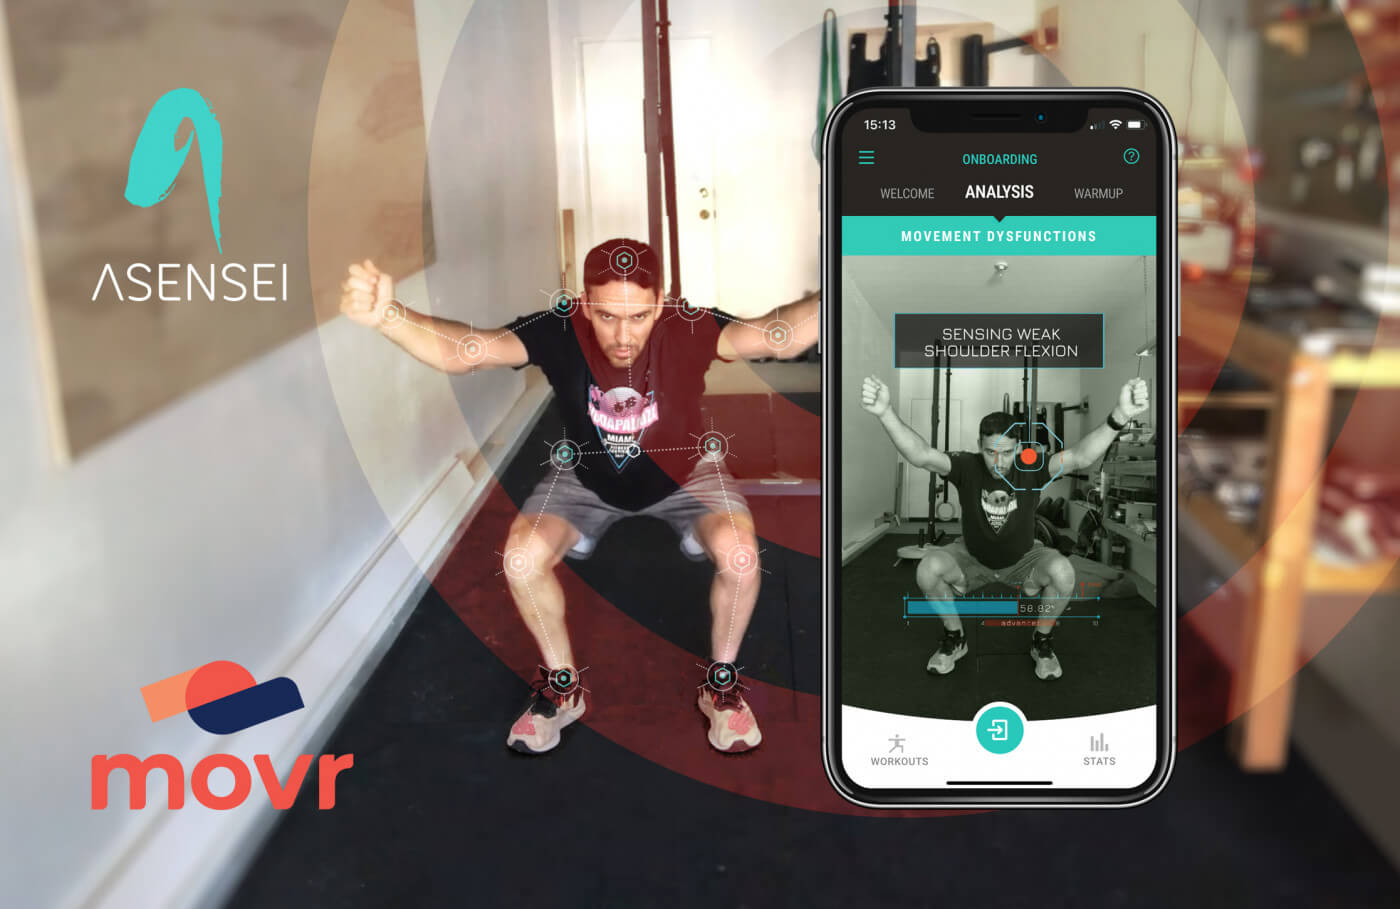 ASENSEI and movr Personalize Connected Fitness with AI Movement Analysis